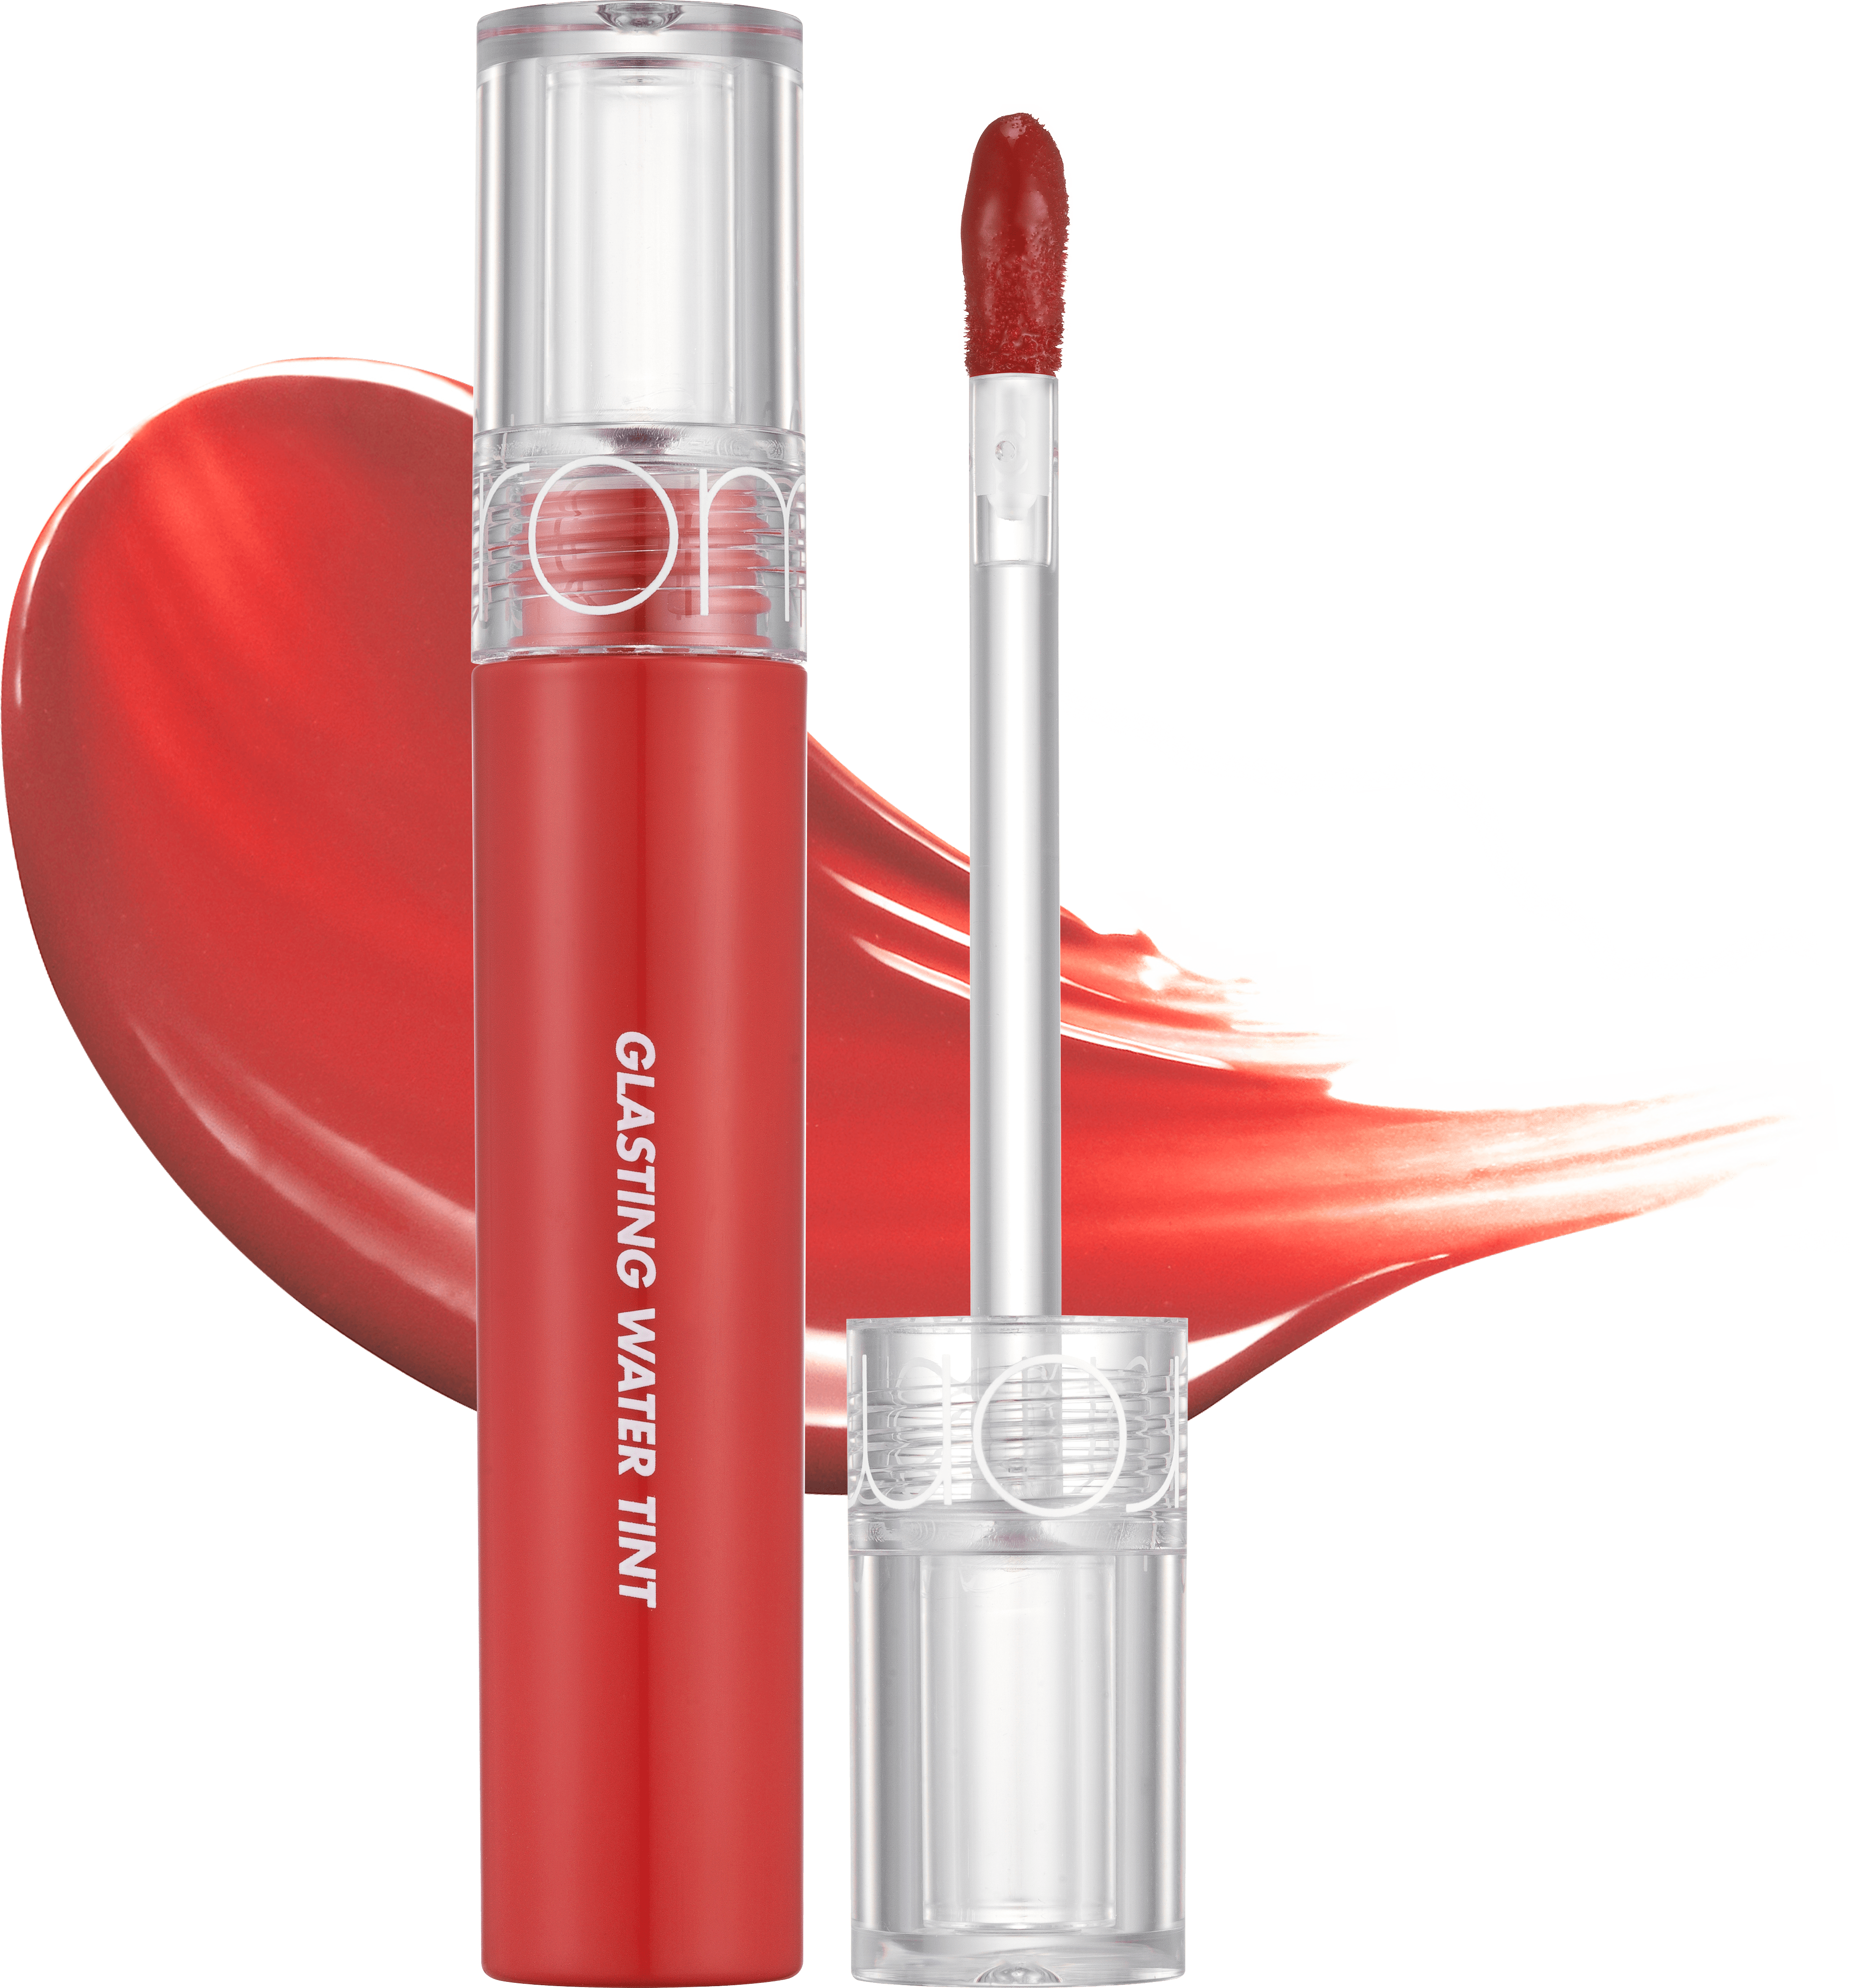 Romand Glasting water tint 01 Coral